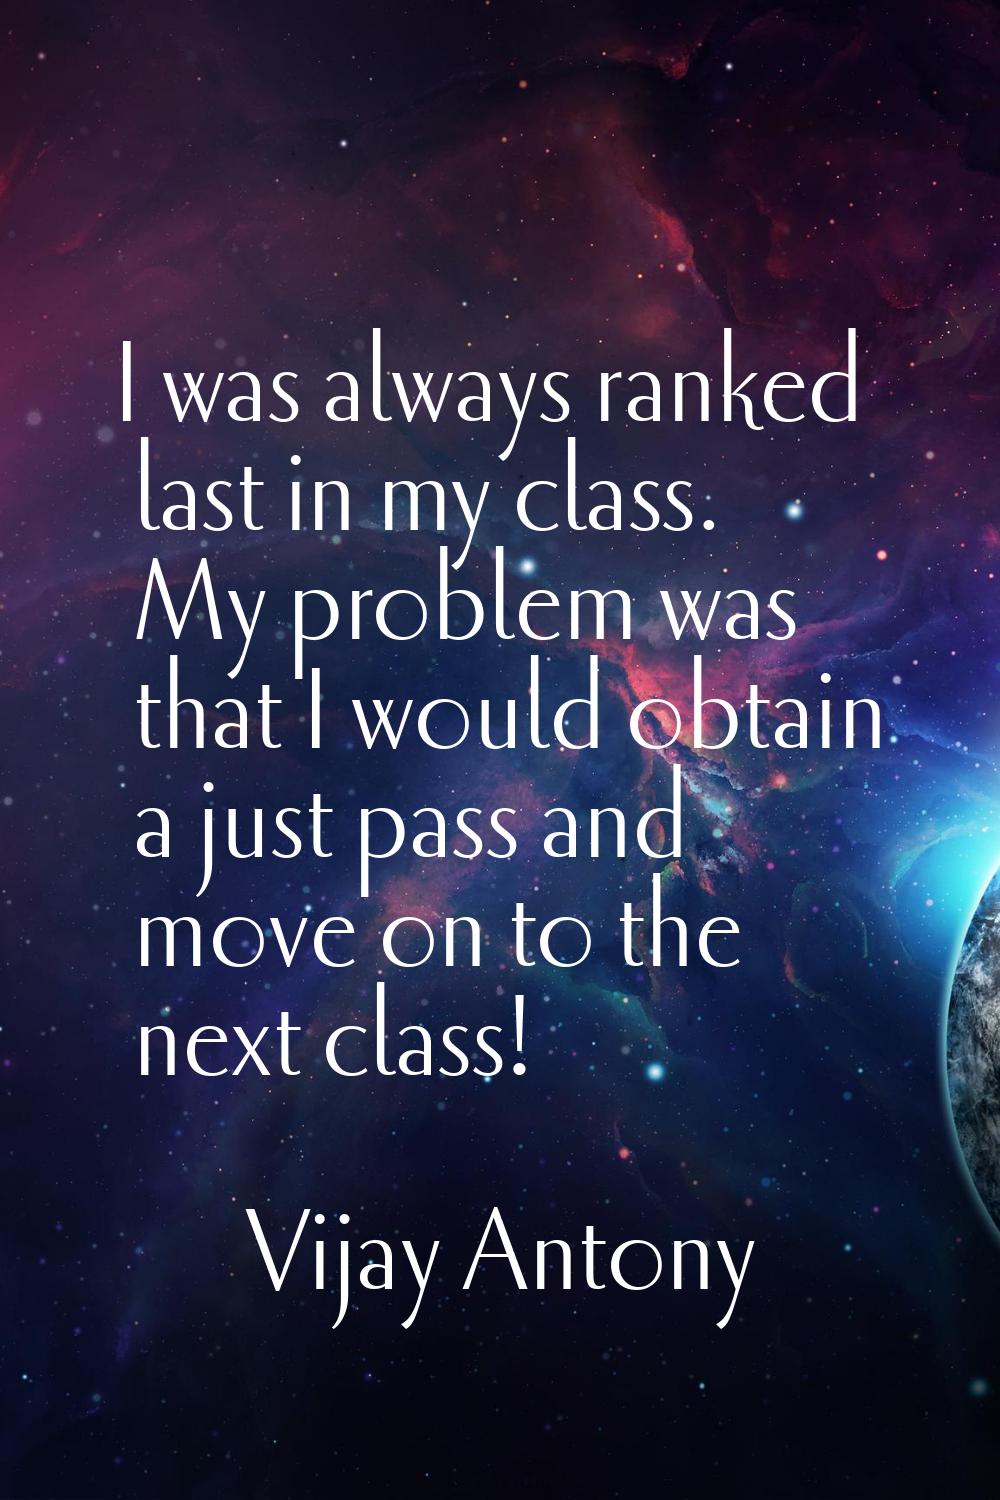 I was always ranked last in my class. My problem was that I would obtain a just pass and move on to